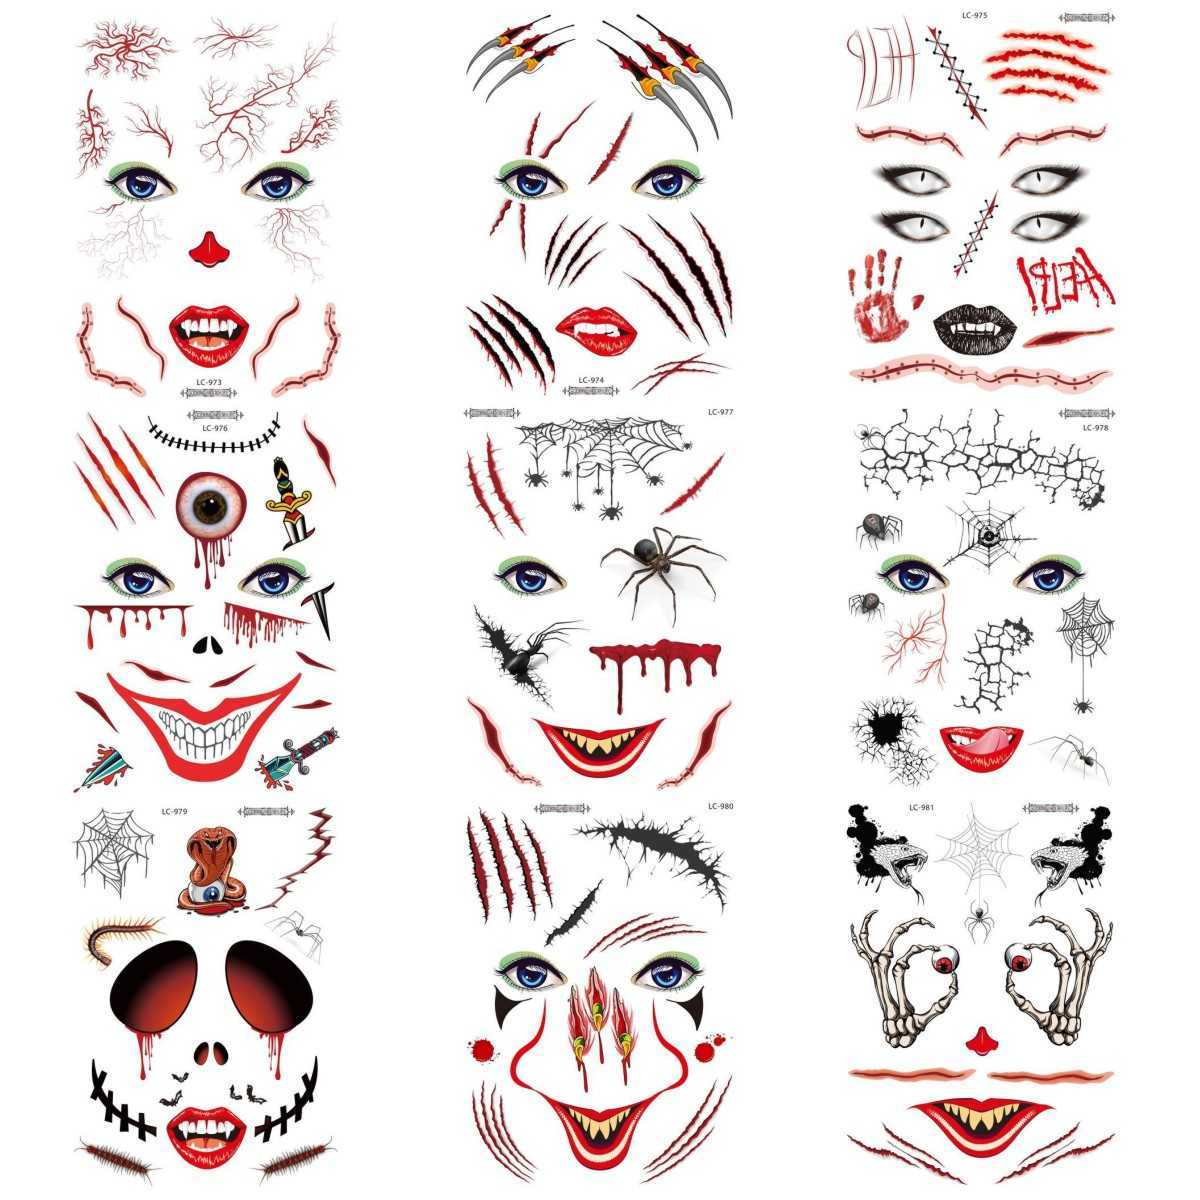 

9pcs Terror Face Scar Tattoos Stickers Bleeding Wound Stitch Temporary Tattoo Arm Body Art for Halloween Cosplay Costume Party